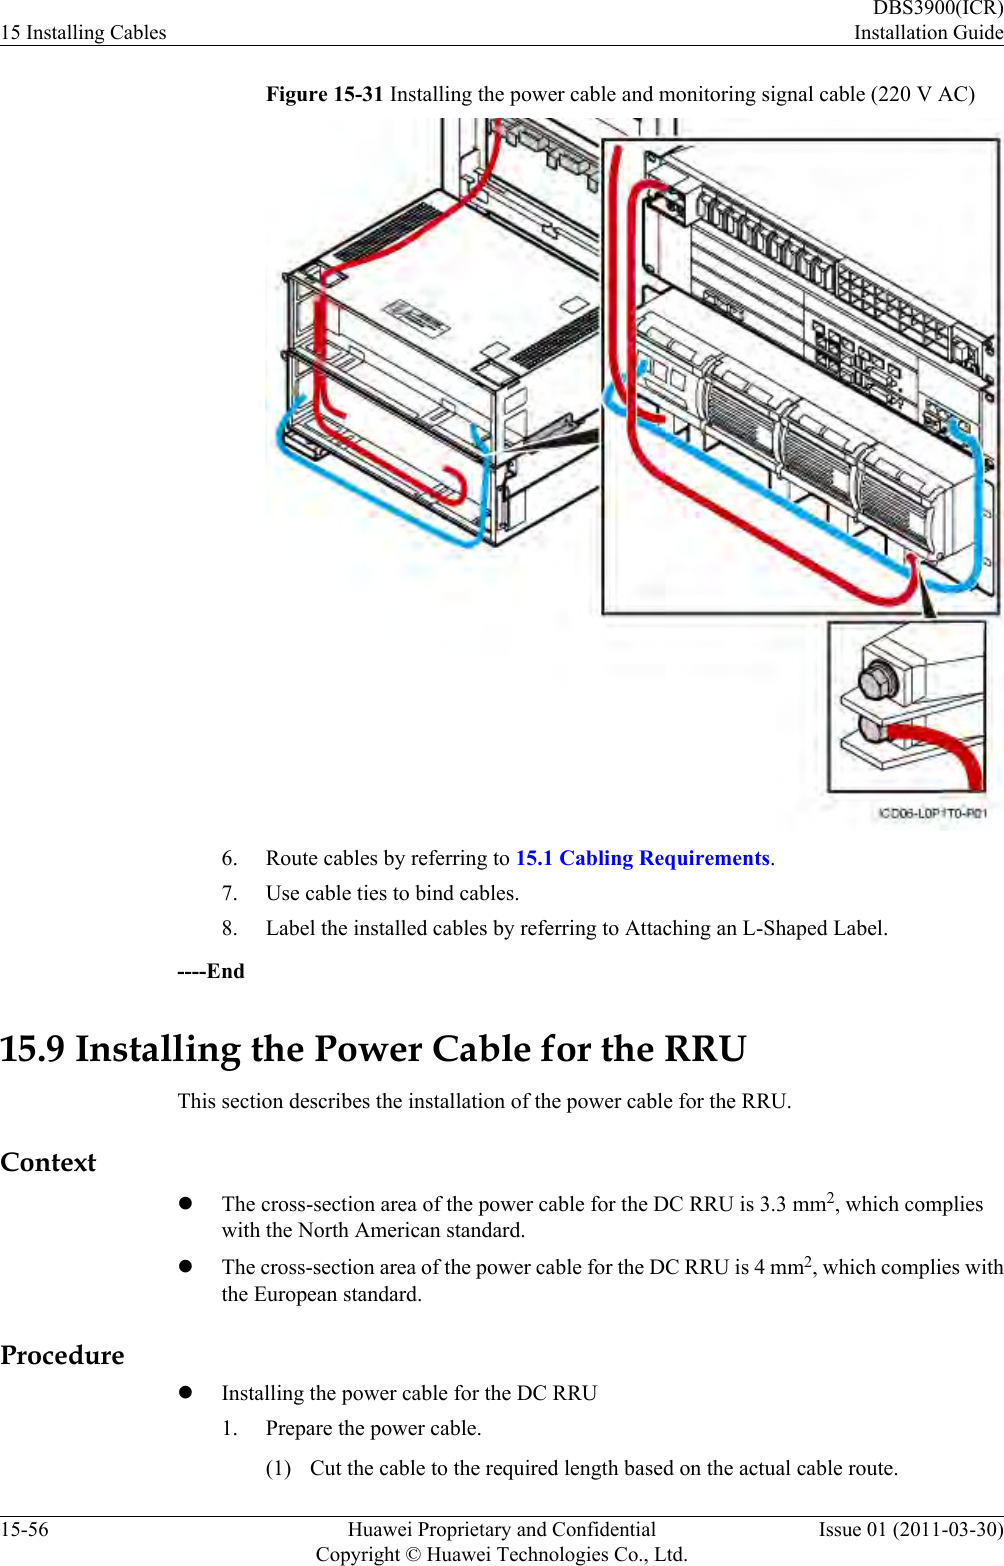 Figure 15-31 Installing the power cable and monitoring signal cable (220 V AC)6. Route cables by referring to 15.1 Cabling Requirements.7. Use cable ties to bind cables.8. Label the installed cables by referring to Attaching an L-Shaped Label.----End15.9 Installing the Power Cable for the RRUThis section describes the installation of the power cable for the RRU.ContextlThe cross-section area of the power cable for the DC RRU is 3.3 mm2, which complieswith the North American standard.lThe cross-section area of the power cable for the DC RRU is 4 mm2, which complies withthe European standard.ProcedurelInstalling the power cable for the DC RRU1. Prepare the power cable.(1) Cut the cable to the required length based on the actual cable route.15 Installing CablesDBS3900(ICR)Installation Guide15-56 Huawei Proprietary and ConfidentialCopyright © Huawei Technologies Co., Ltd.Issue 01 (2011-03-30)